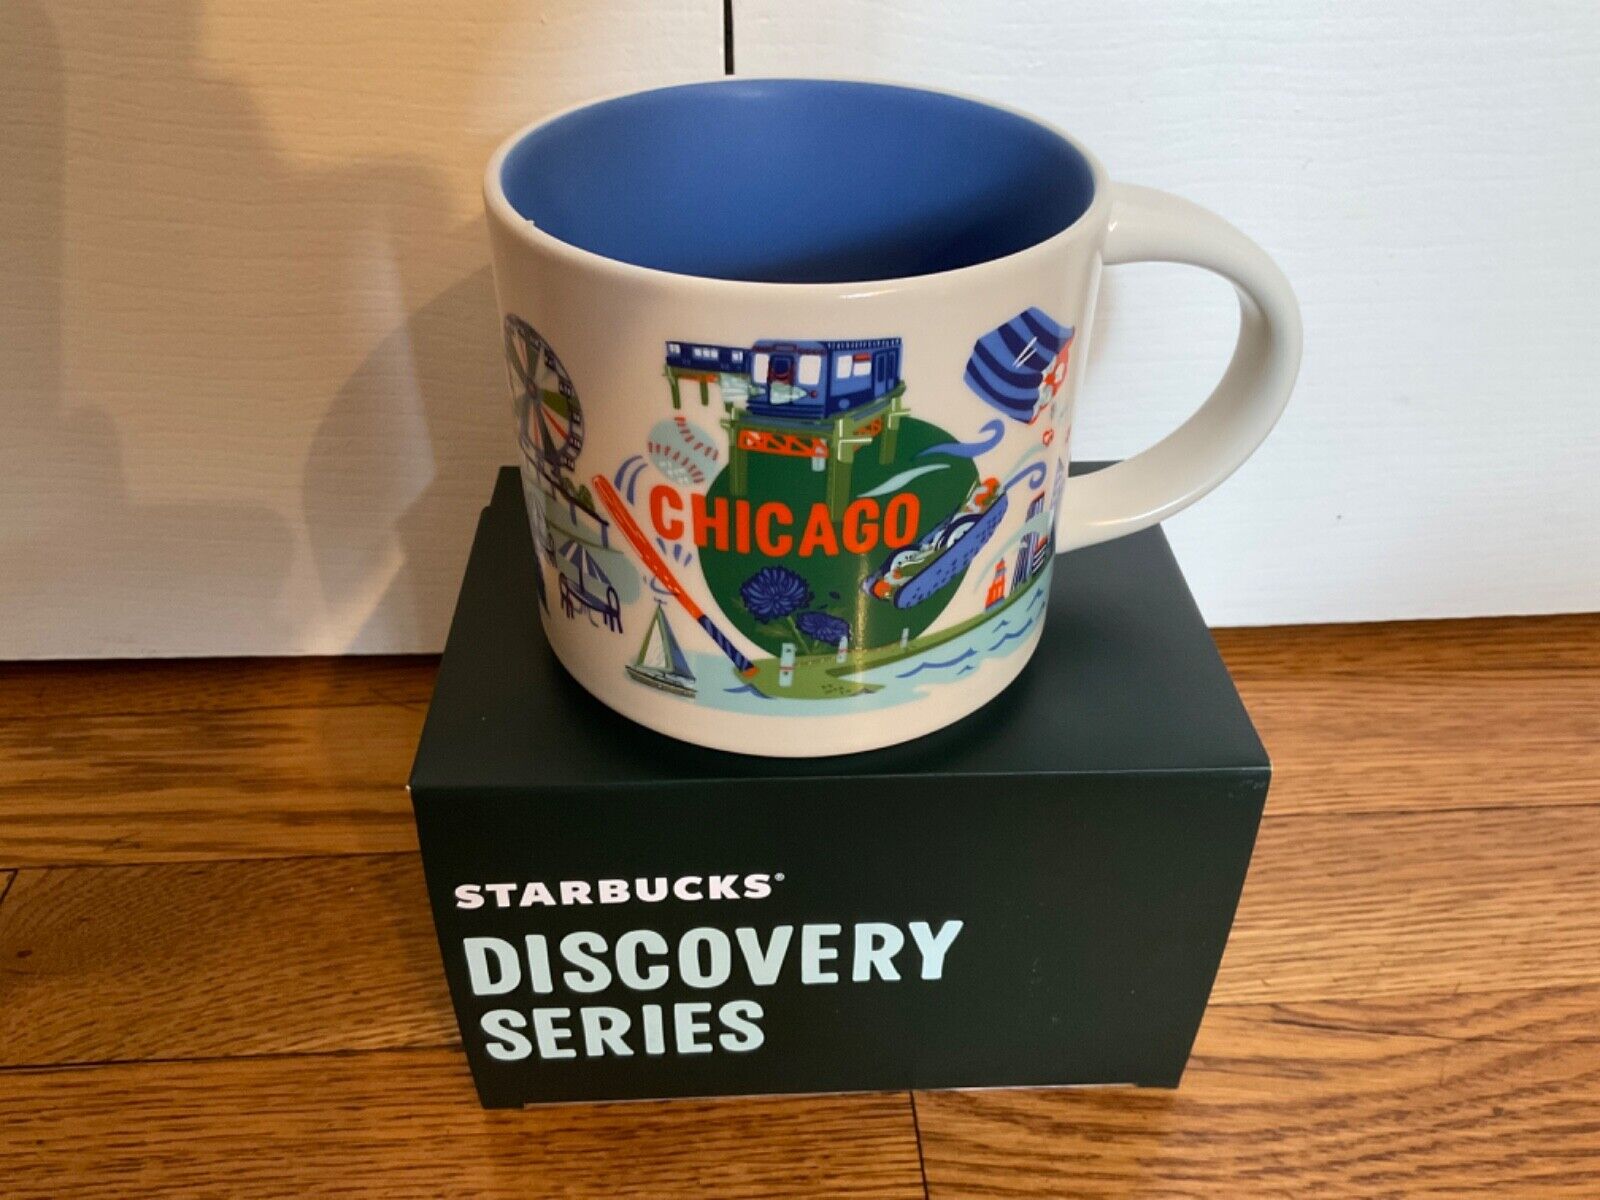 STARBUCKS “DISCOVERY SERIES” 14 oz. CHICAGO MUG BRAND NEW JUST RELEASED